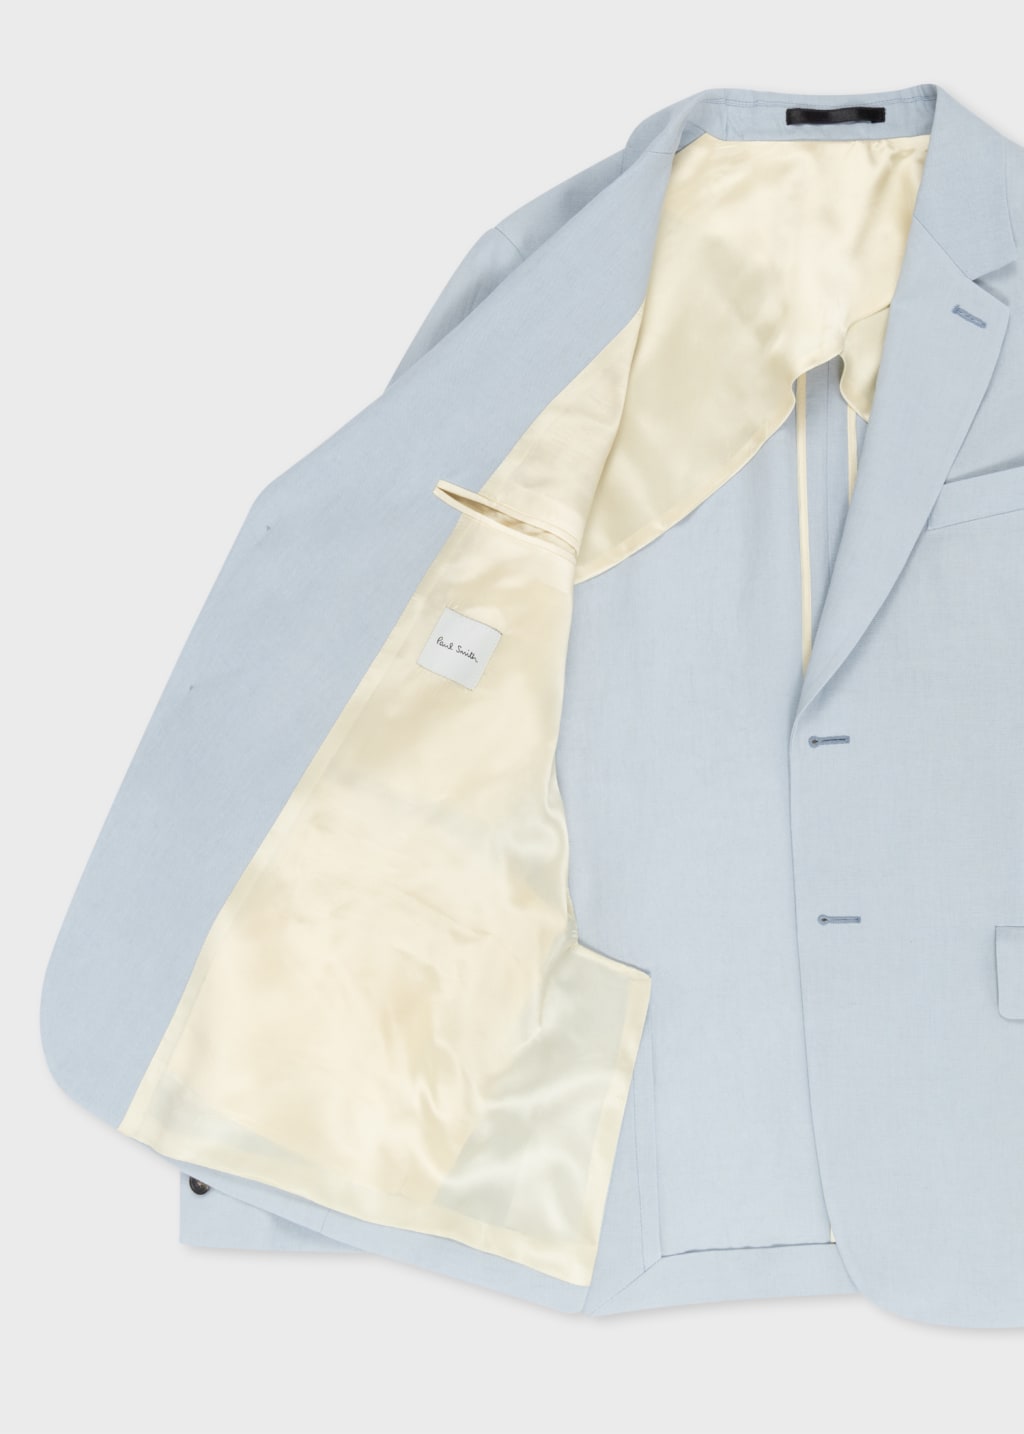 Product View - Light Blue Linen Buggy-Lined Blazer